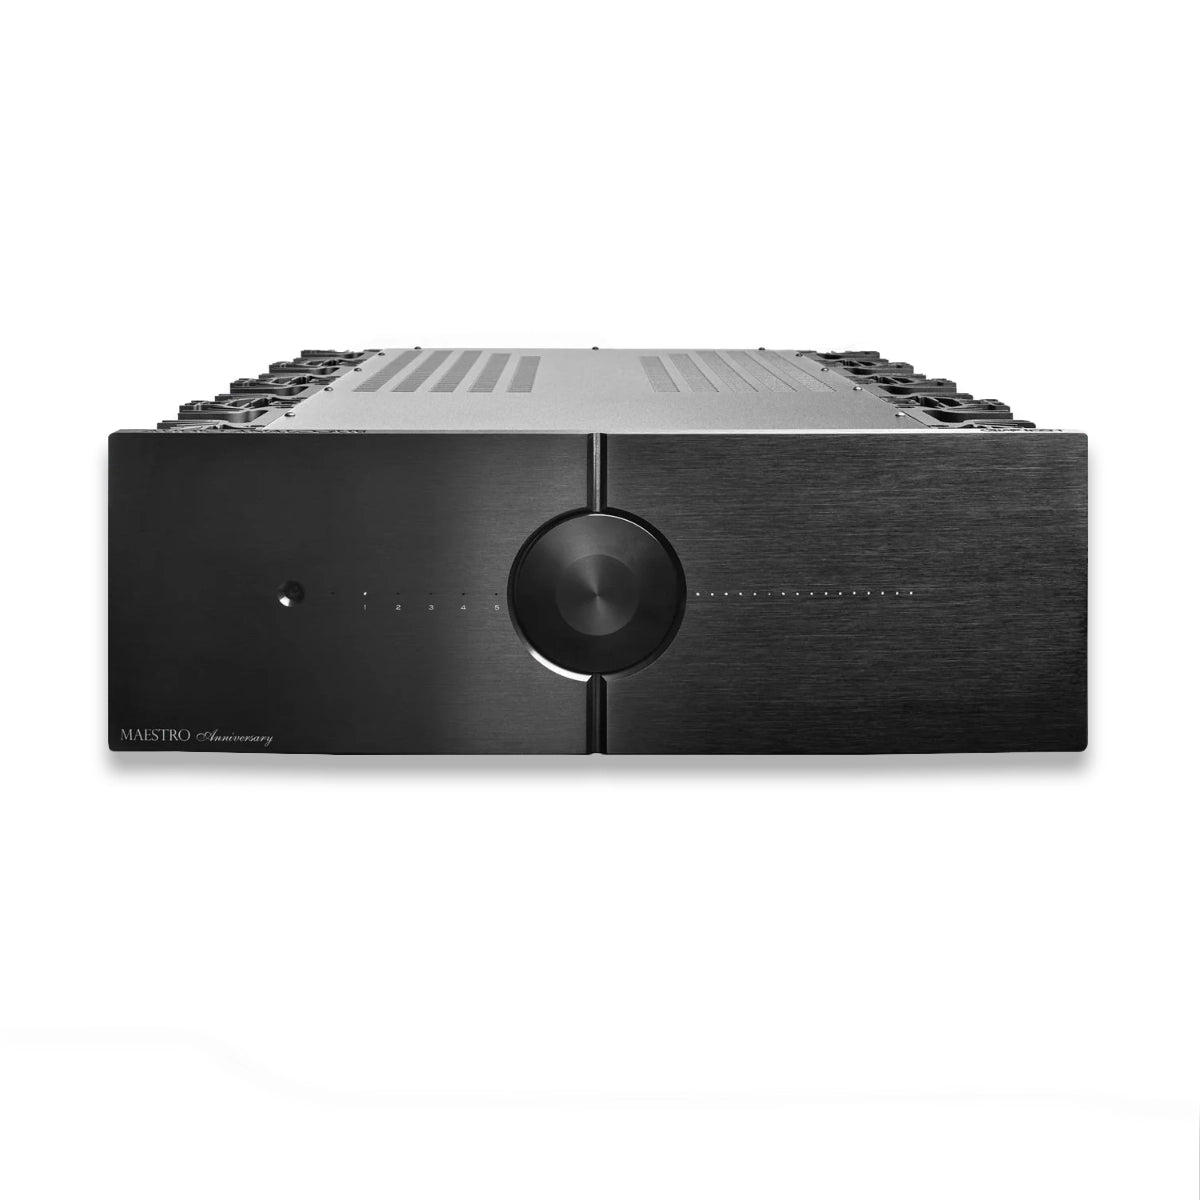 An image of Audio Analogue's Maestro 150W Integrated Amplifier in black finish.